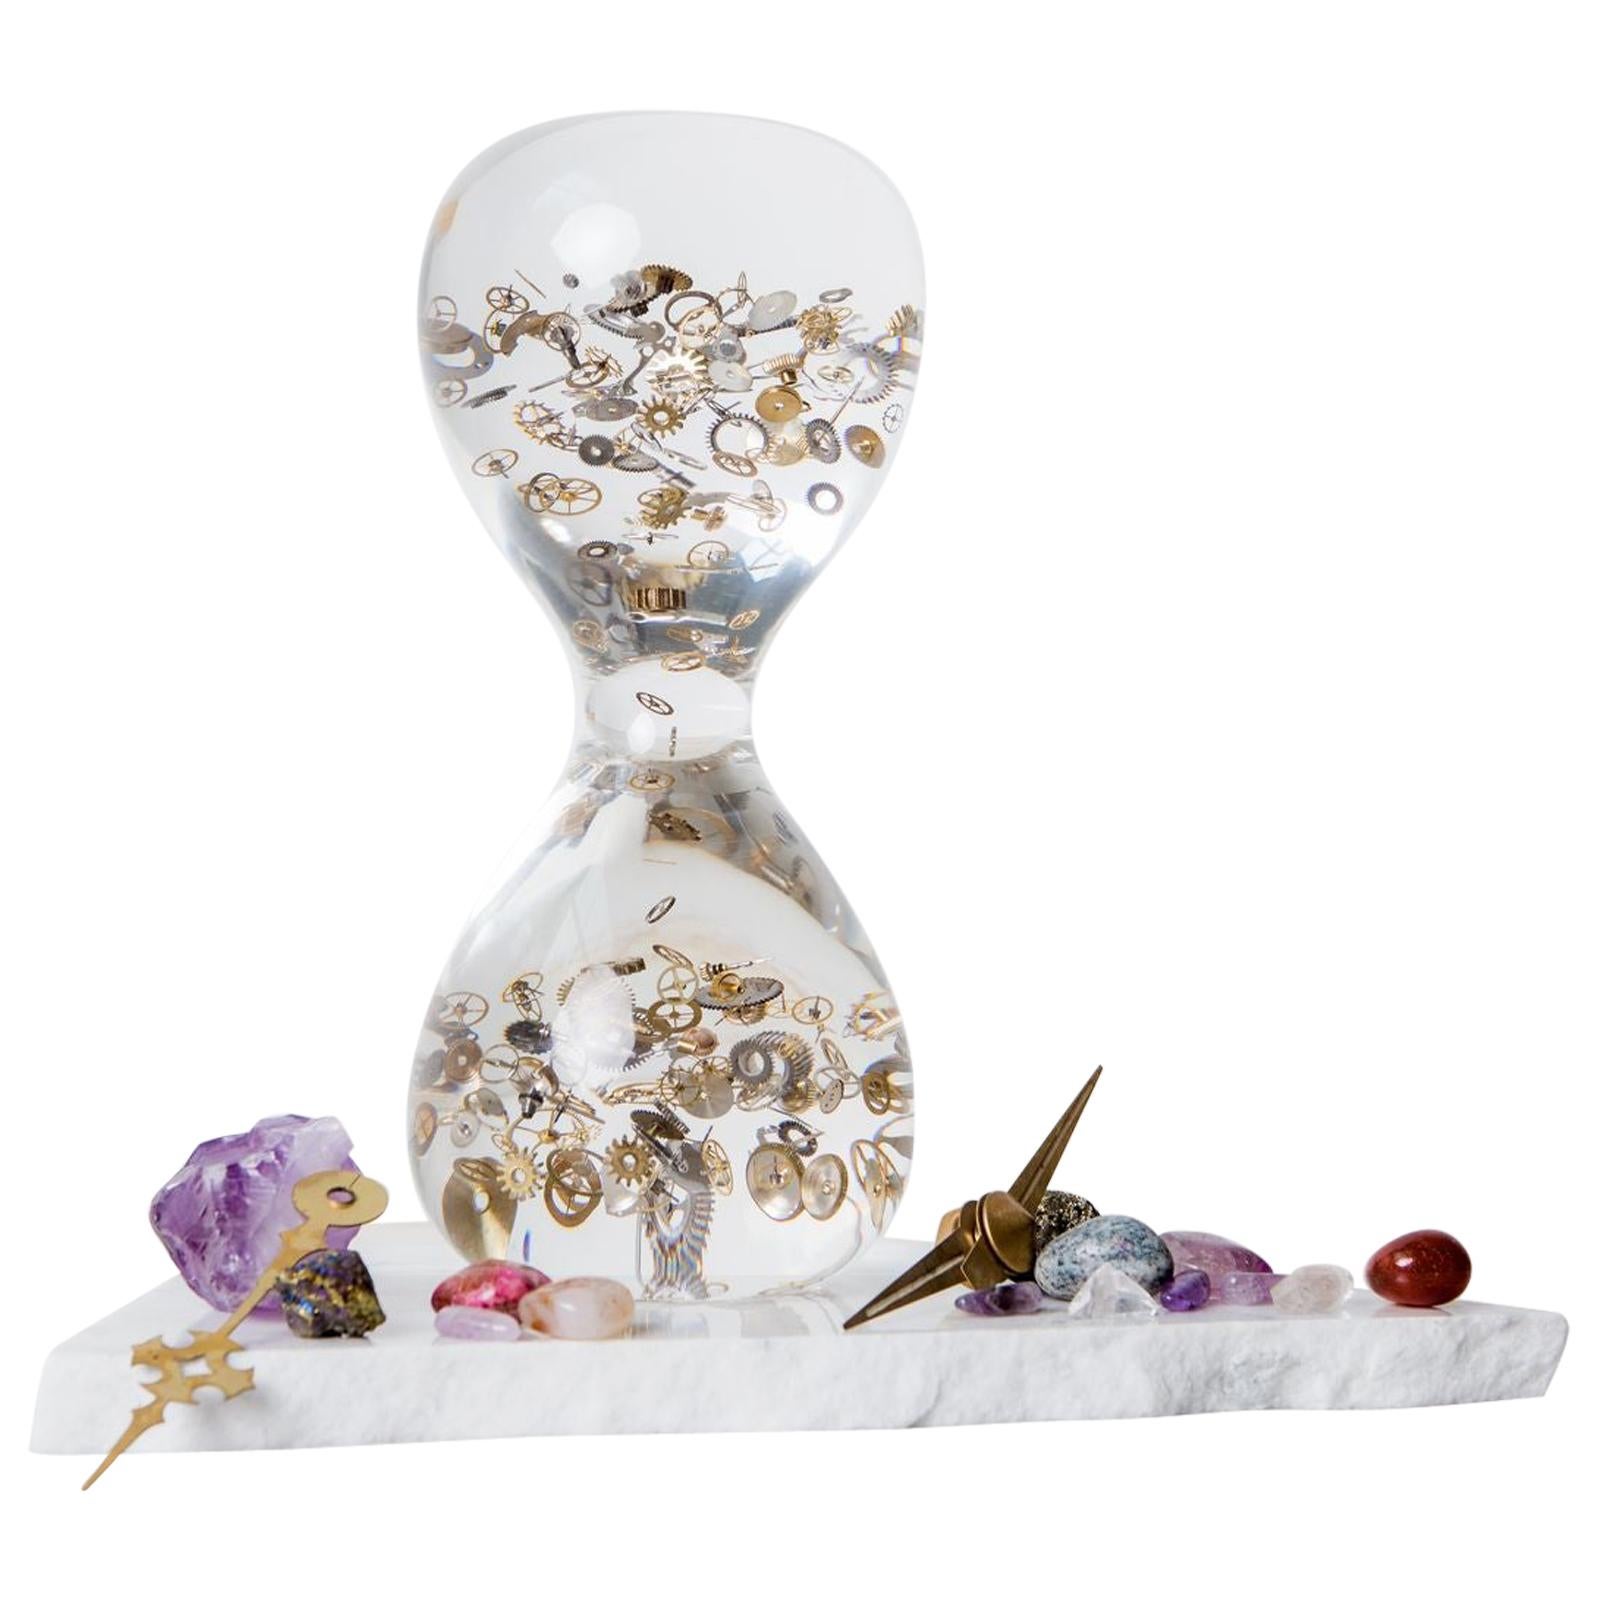 Berd Vay'e Limited Edition "Passage Through Time" Lucite Sculpture 'Small' For Sale